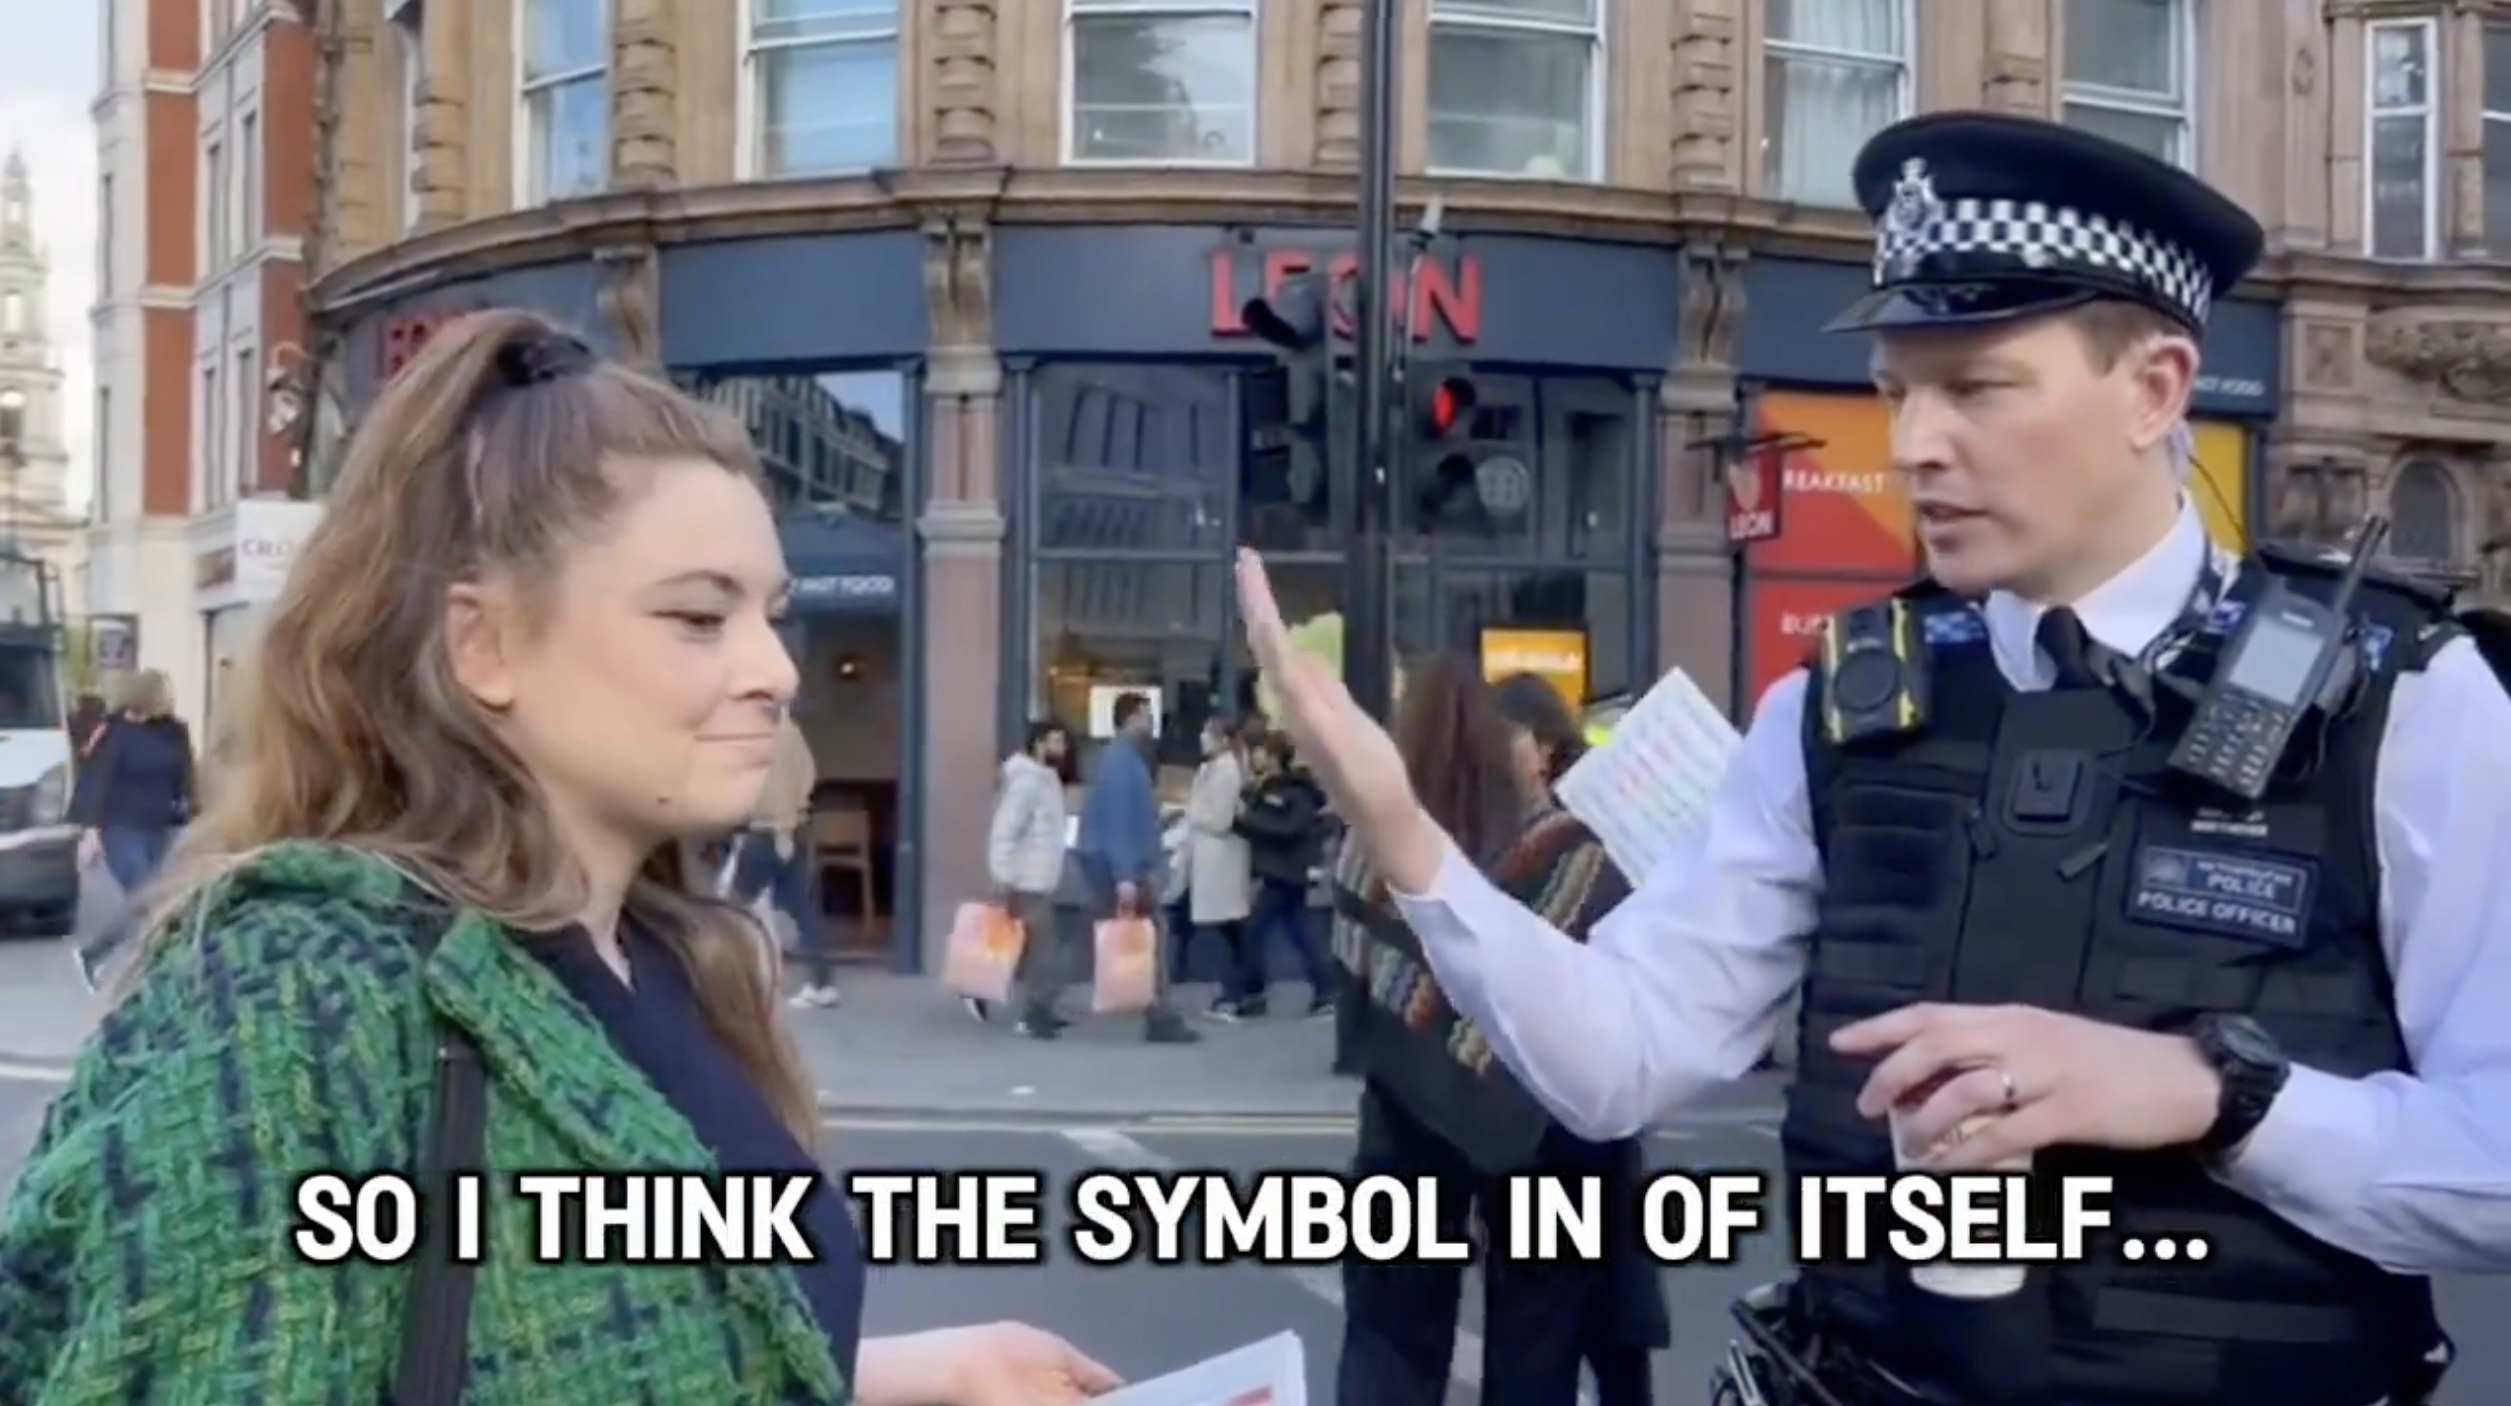 A distressed Jewish woman is seen complaining about the Nazi symbol on placards